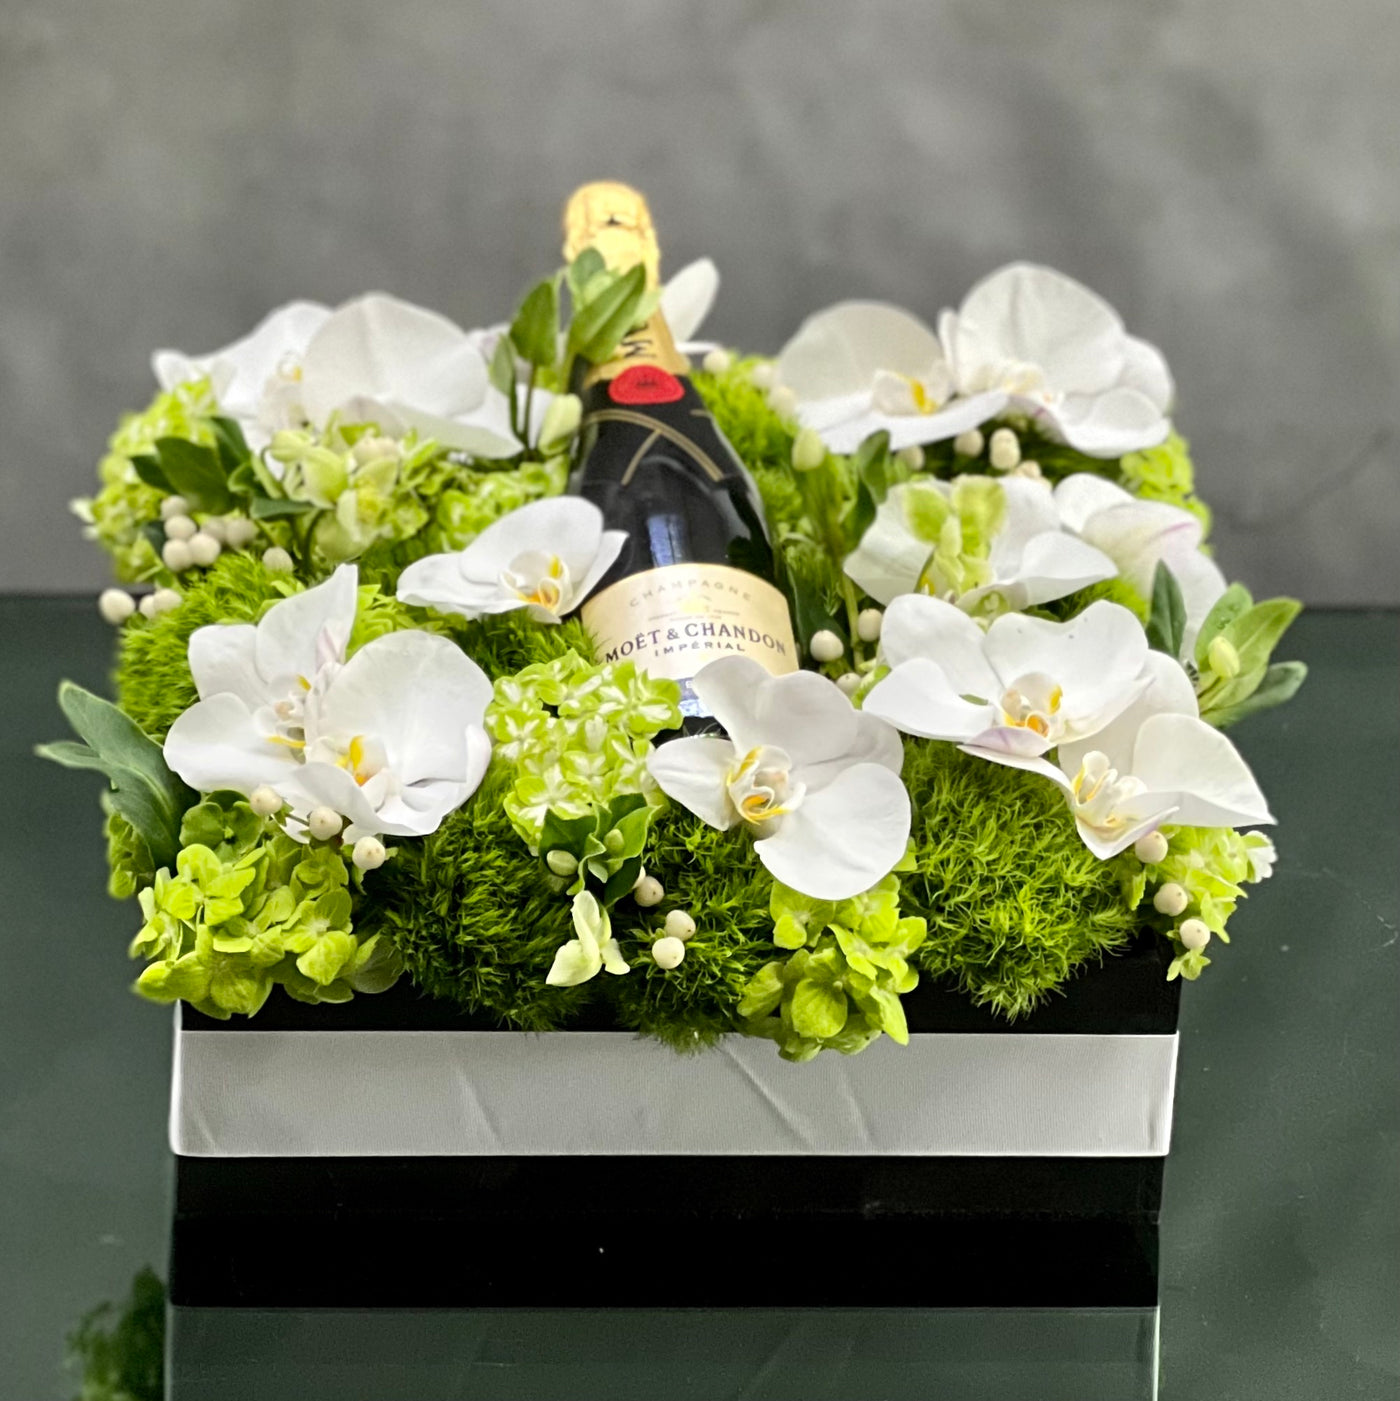 Beverly Hills Florist presents this luxury Moet floral box with orchids and other locally sourced flowers. 24 inch square box